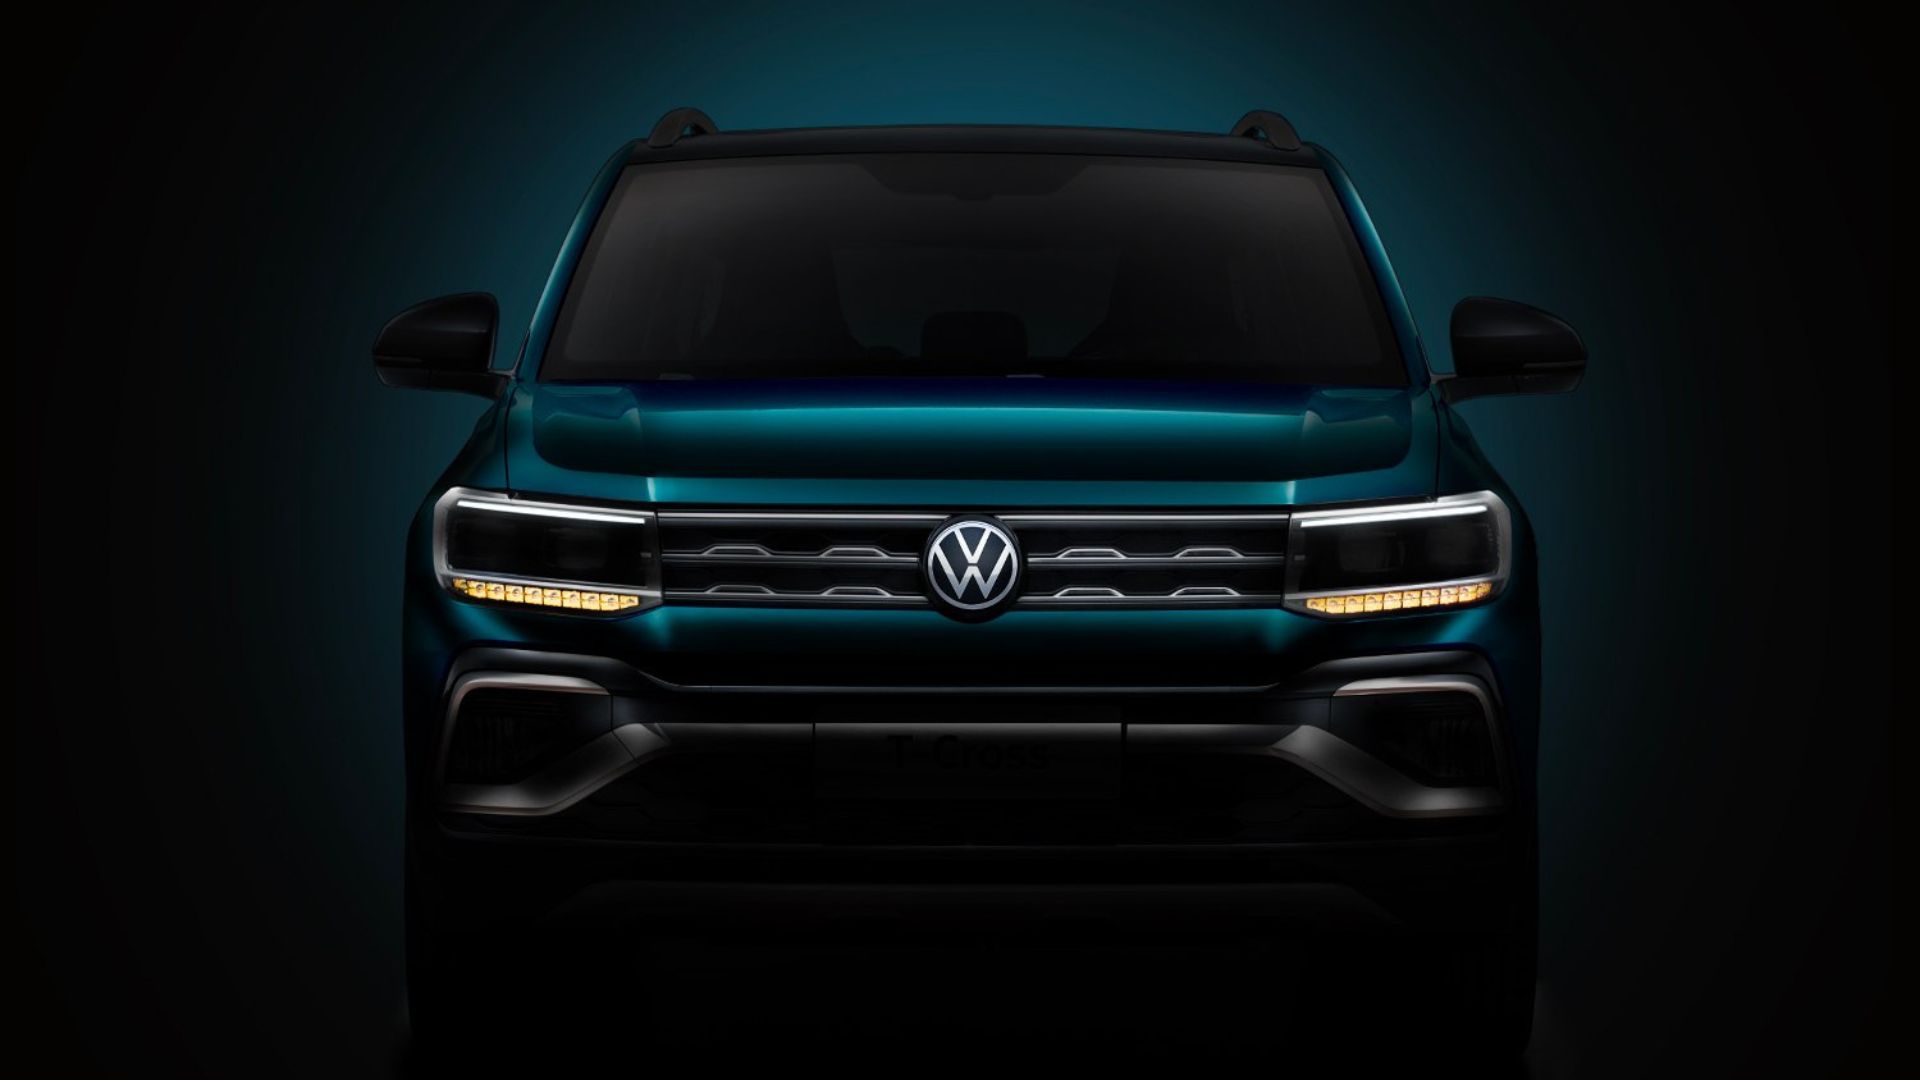 This could be the new Volkswagen T-Cross with a turbo engine